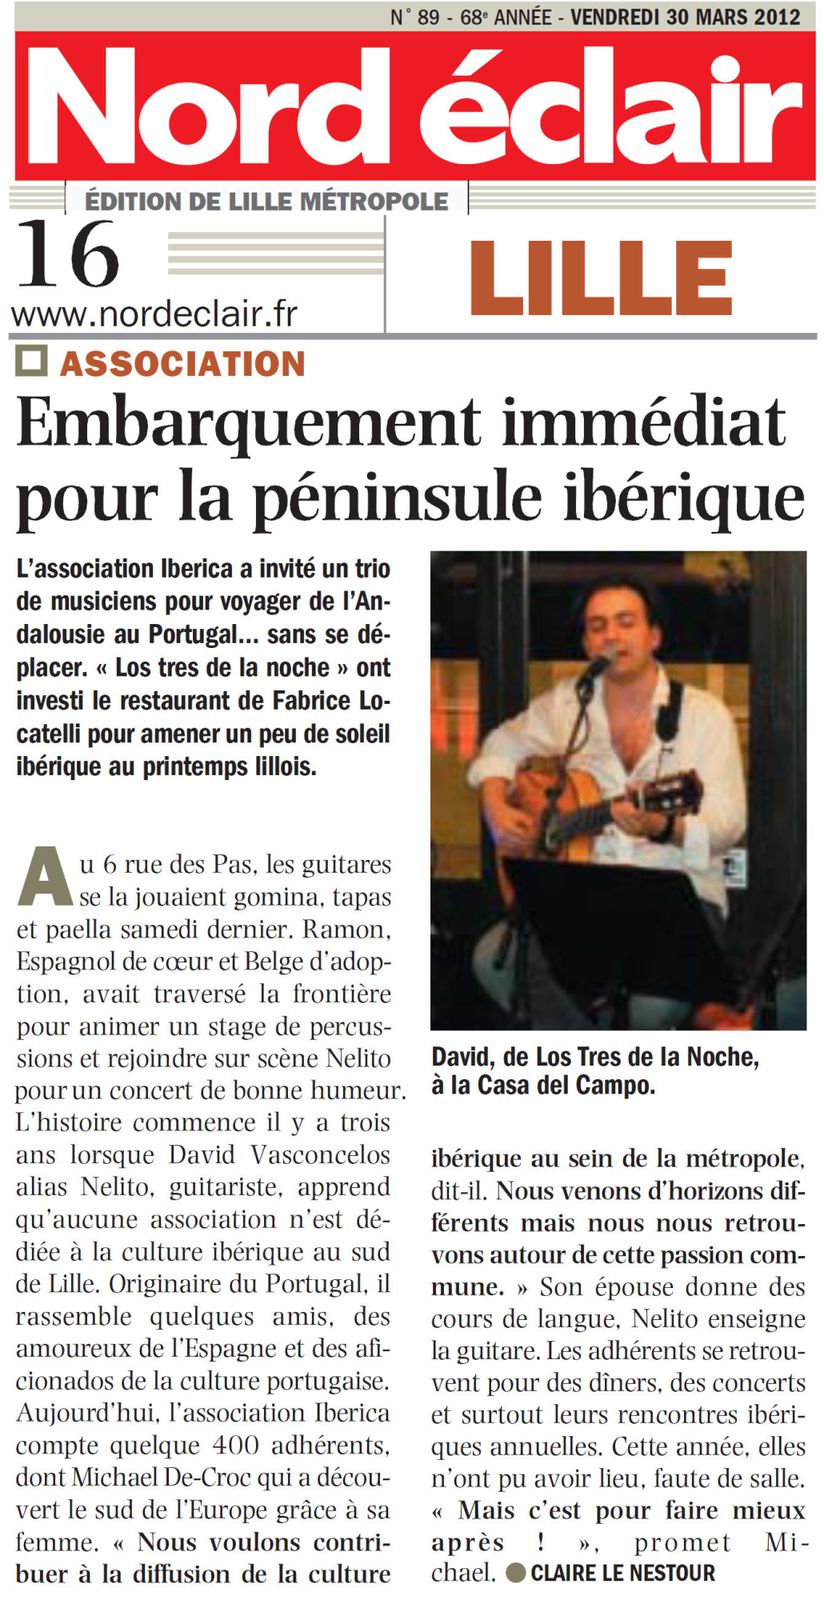 12 03 29 article nord eclair